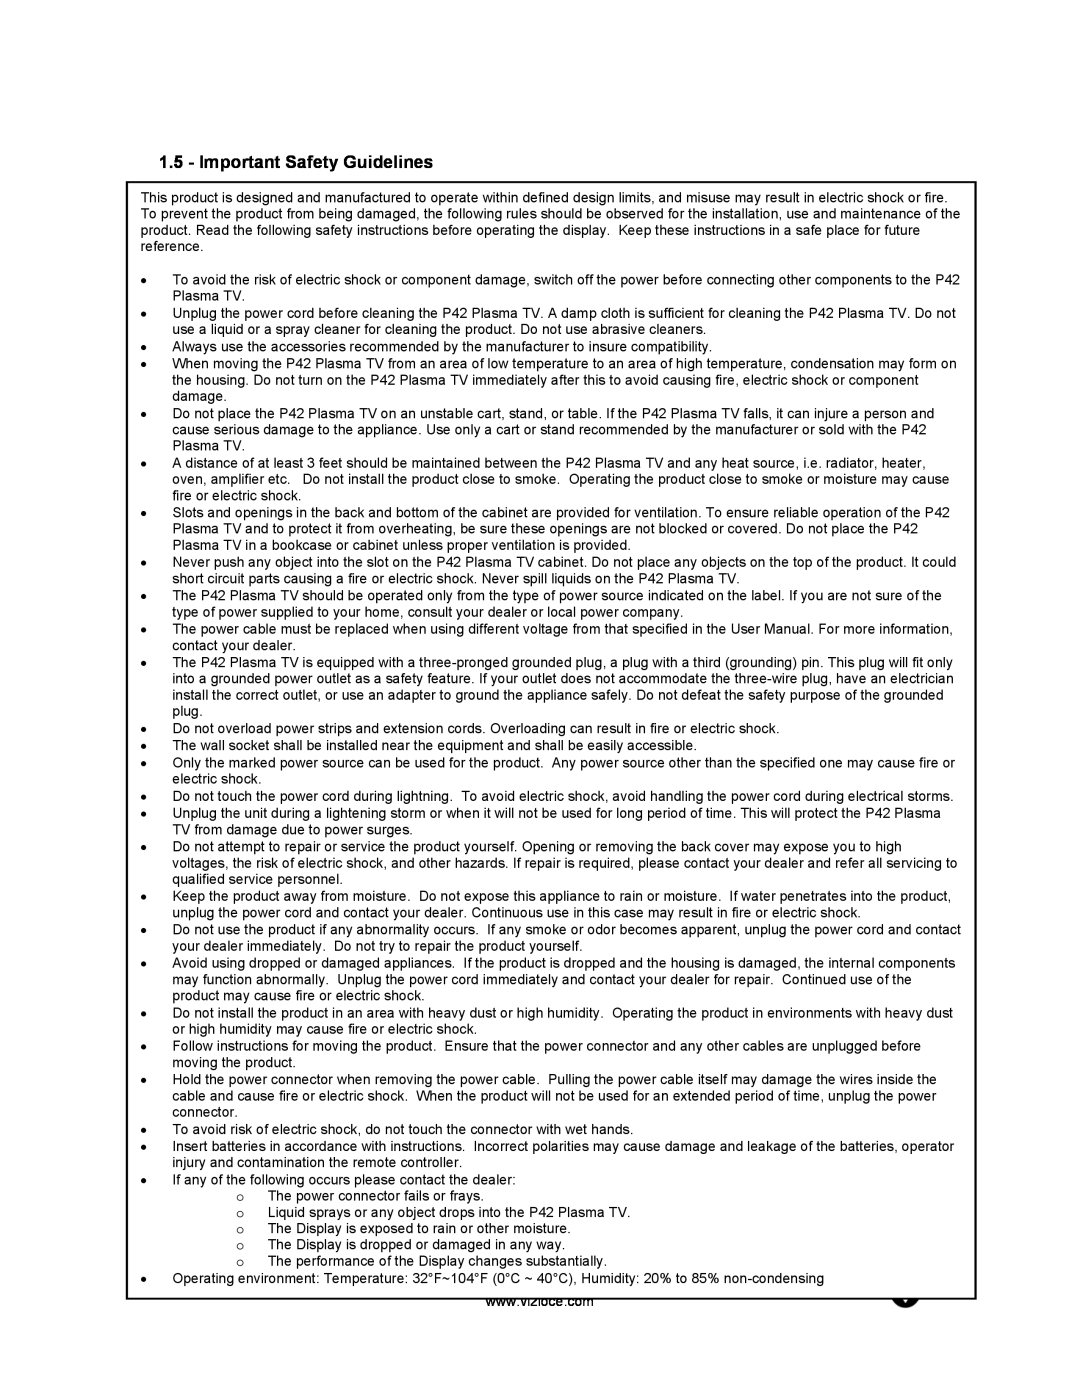 Vizio P42 manual Important Safety Guidelines 